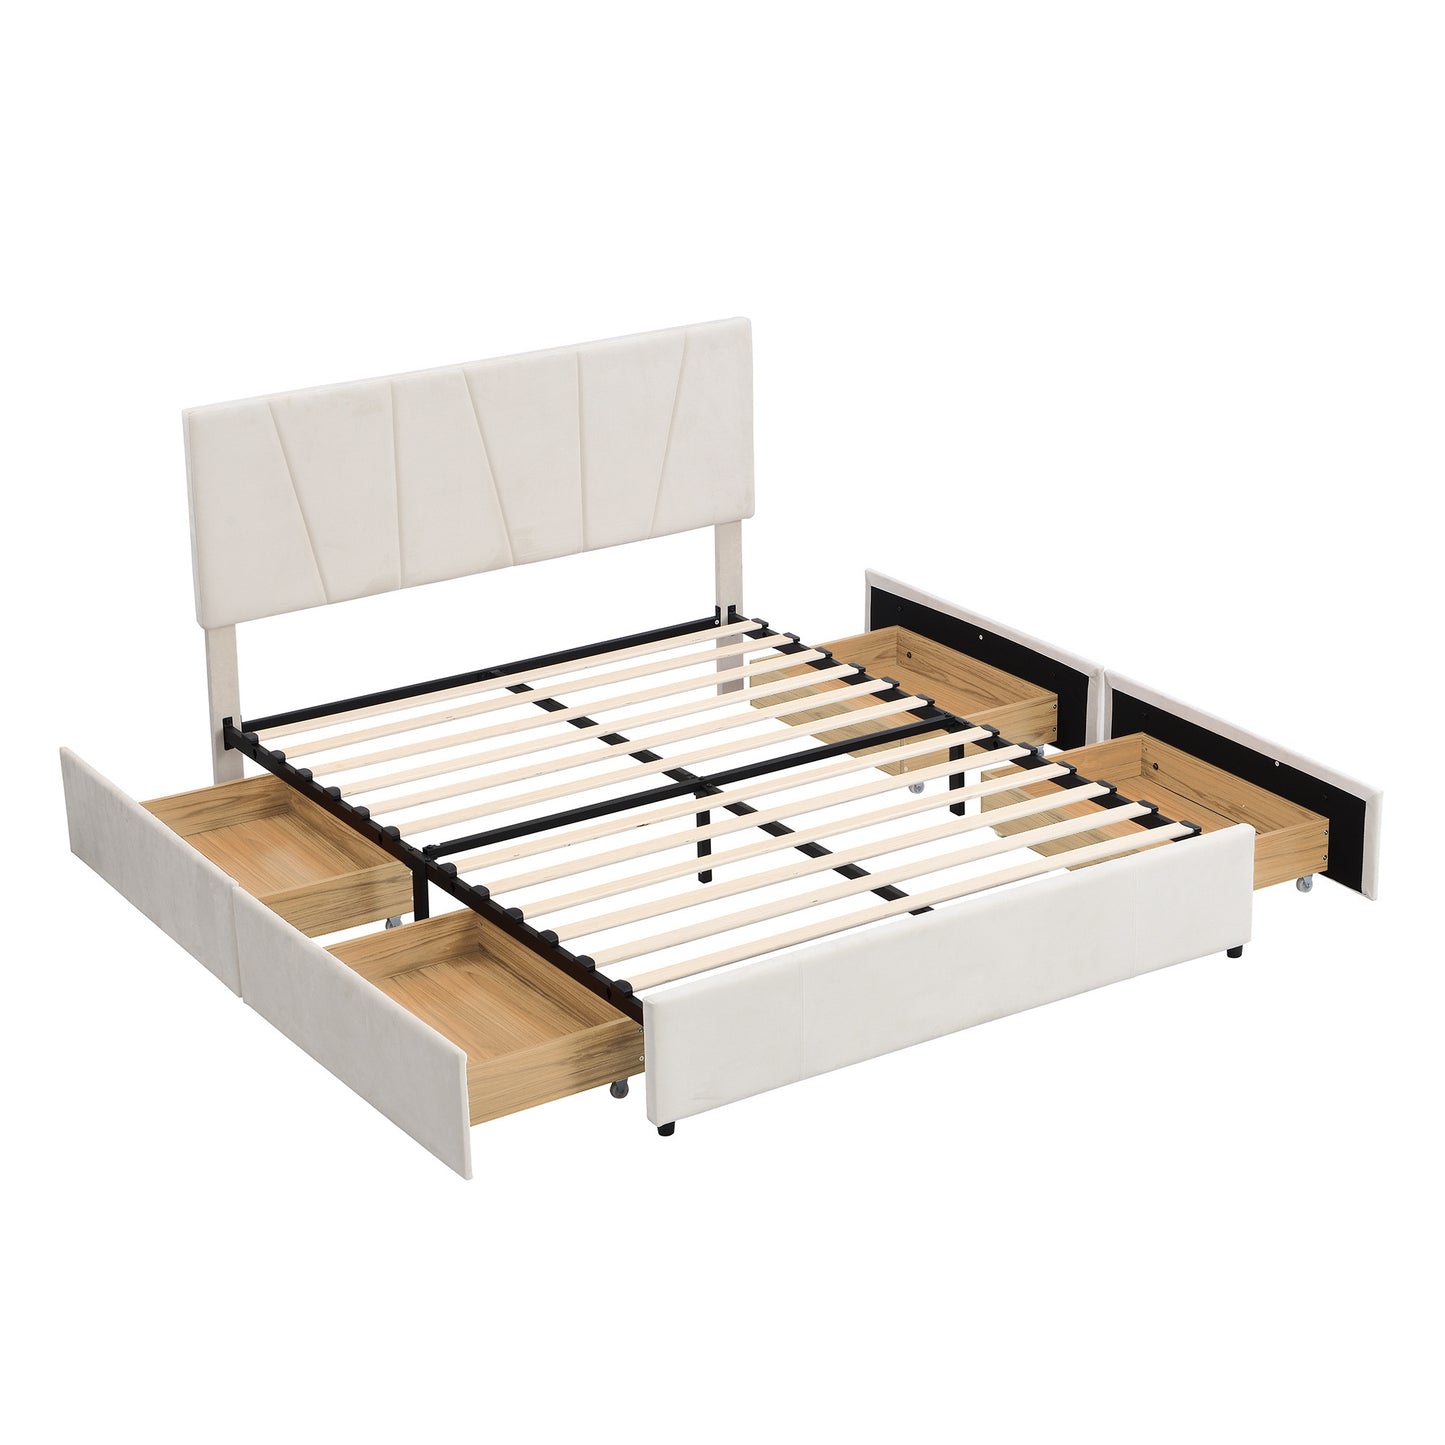 Queen Size Upholstery Platform Bed with Four Drawers on Two Sides, Adjustable Headboard, Beige(Old SKU: WF291774AAA)